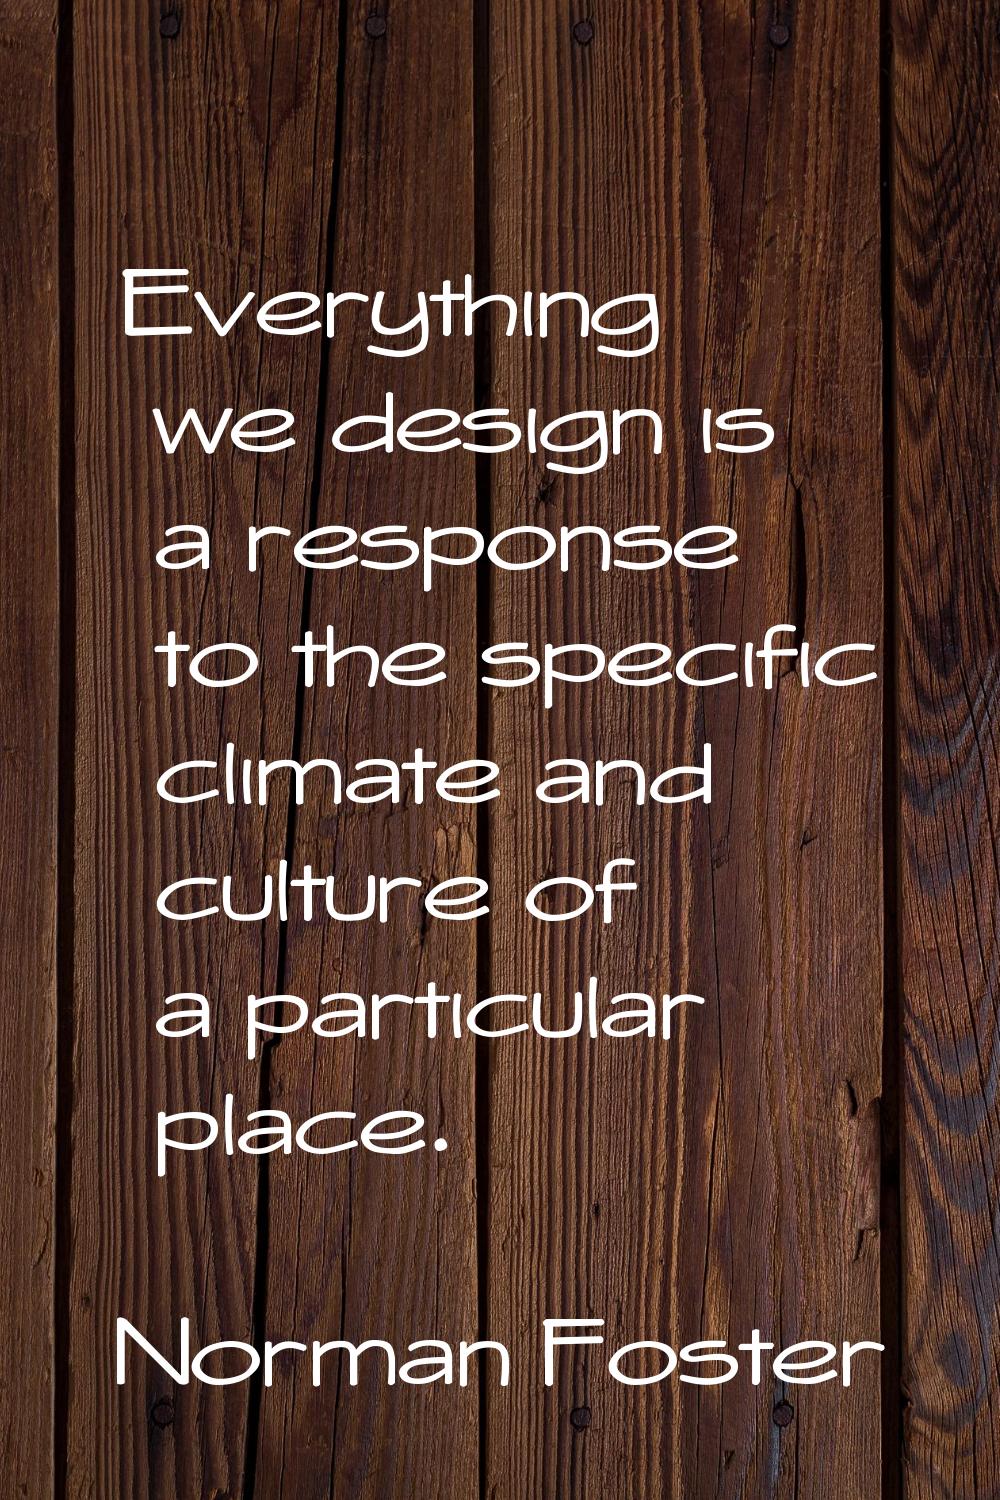 Everything we design is a response to the specific climate and culture of a particular place.